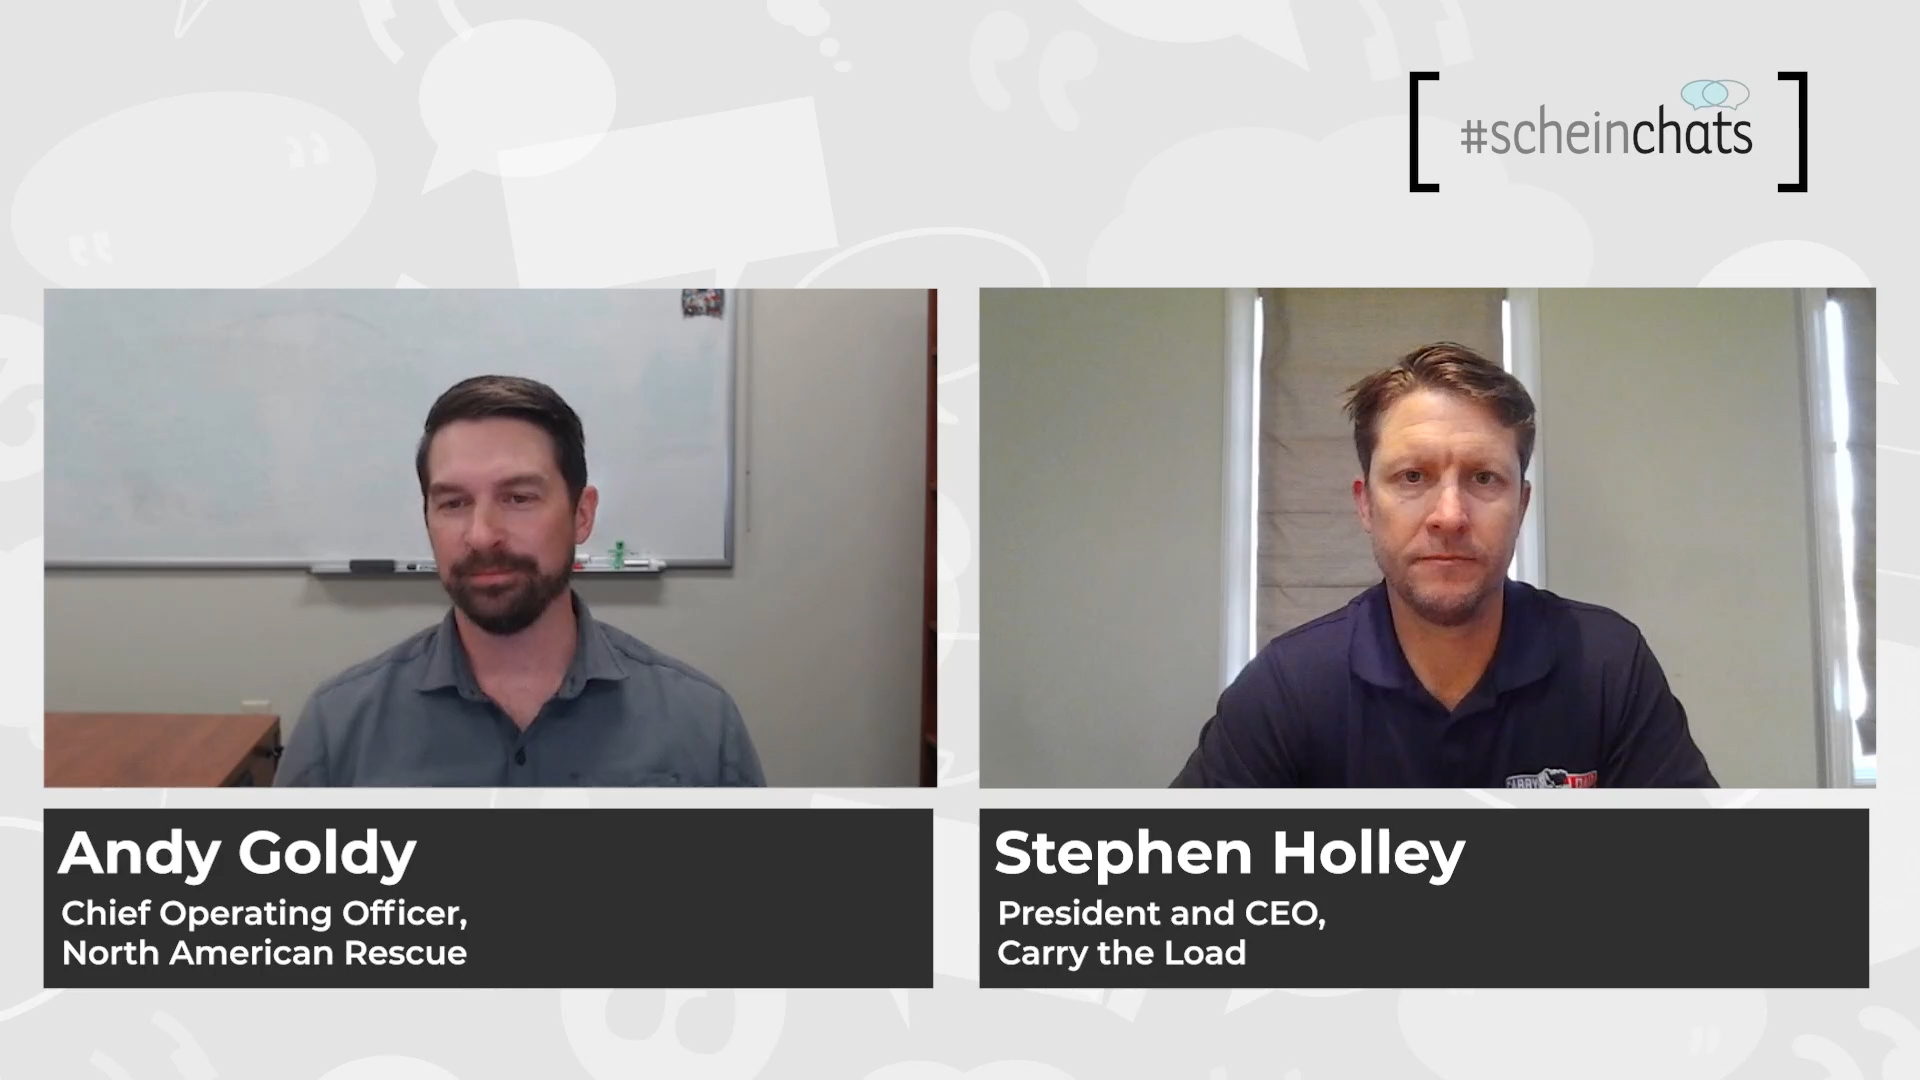 In this episode of #ScheinChats, Henry Schein’s signature social media series, Andy Goldy, Chief Operating Officer for NAR, sat down with Stephen Holley, a former Navy SEAL and co-founder of Carry The Load, to discuss the impact of service, returning home, and the true meaning of Memorial Day.